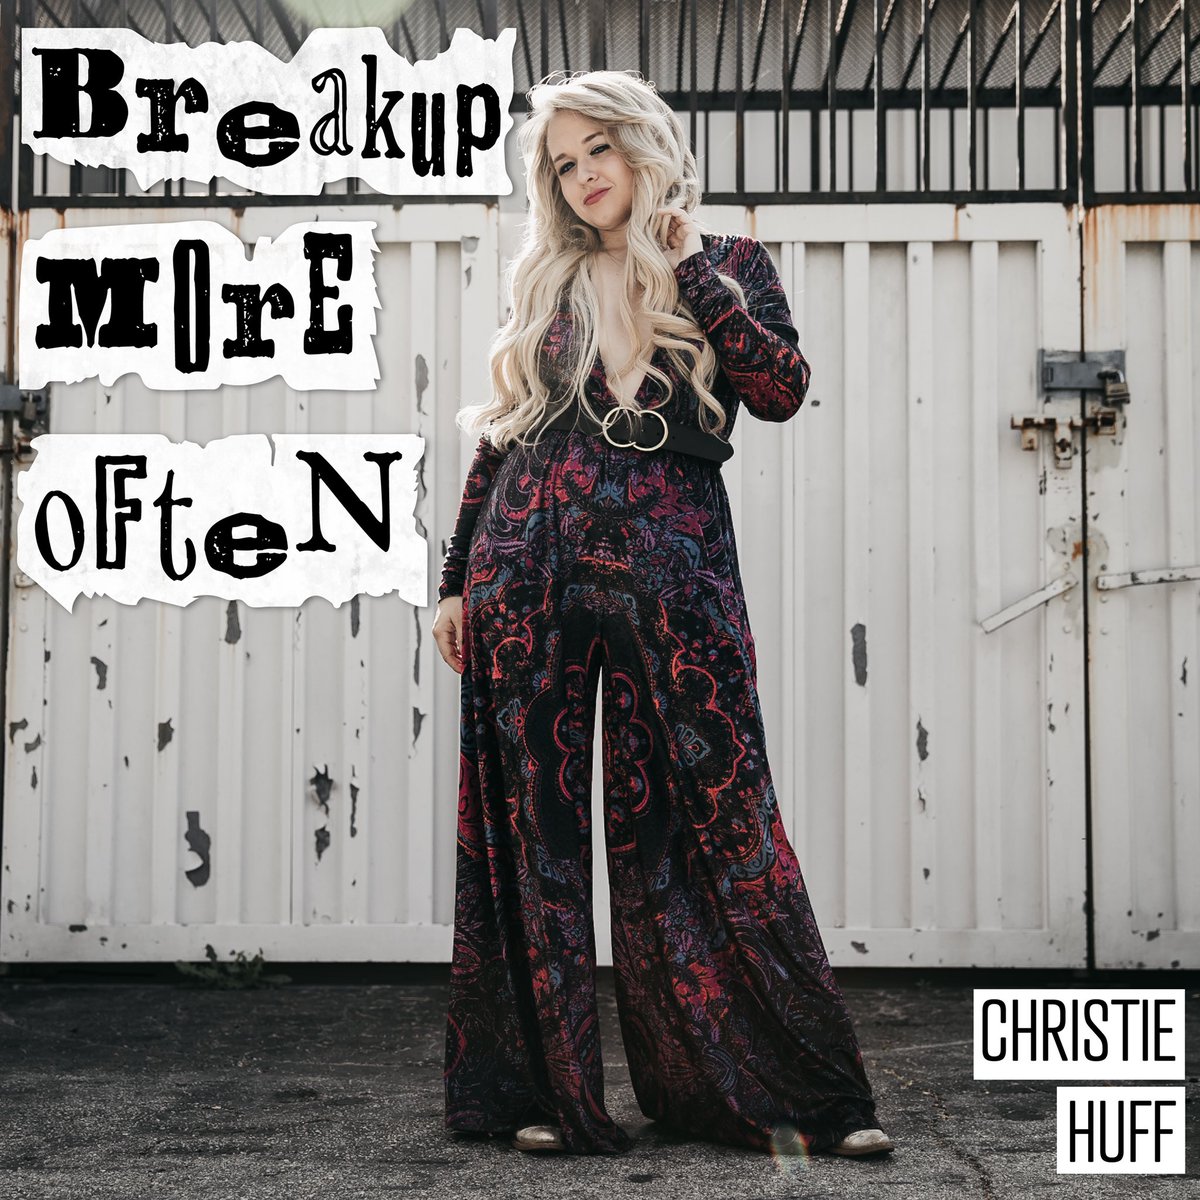 ITS OUT!! ❤️💔😍 I hope you love this song as much as I do!! I got inspired from a past toxic relationship and my now fiancé produced the song! Life really has a way of working itself out 😜 Go listen to “Breakup More Often” now! Link below! ffm.to/breakupmoreoft…